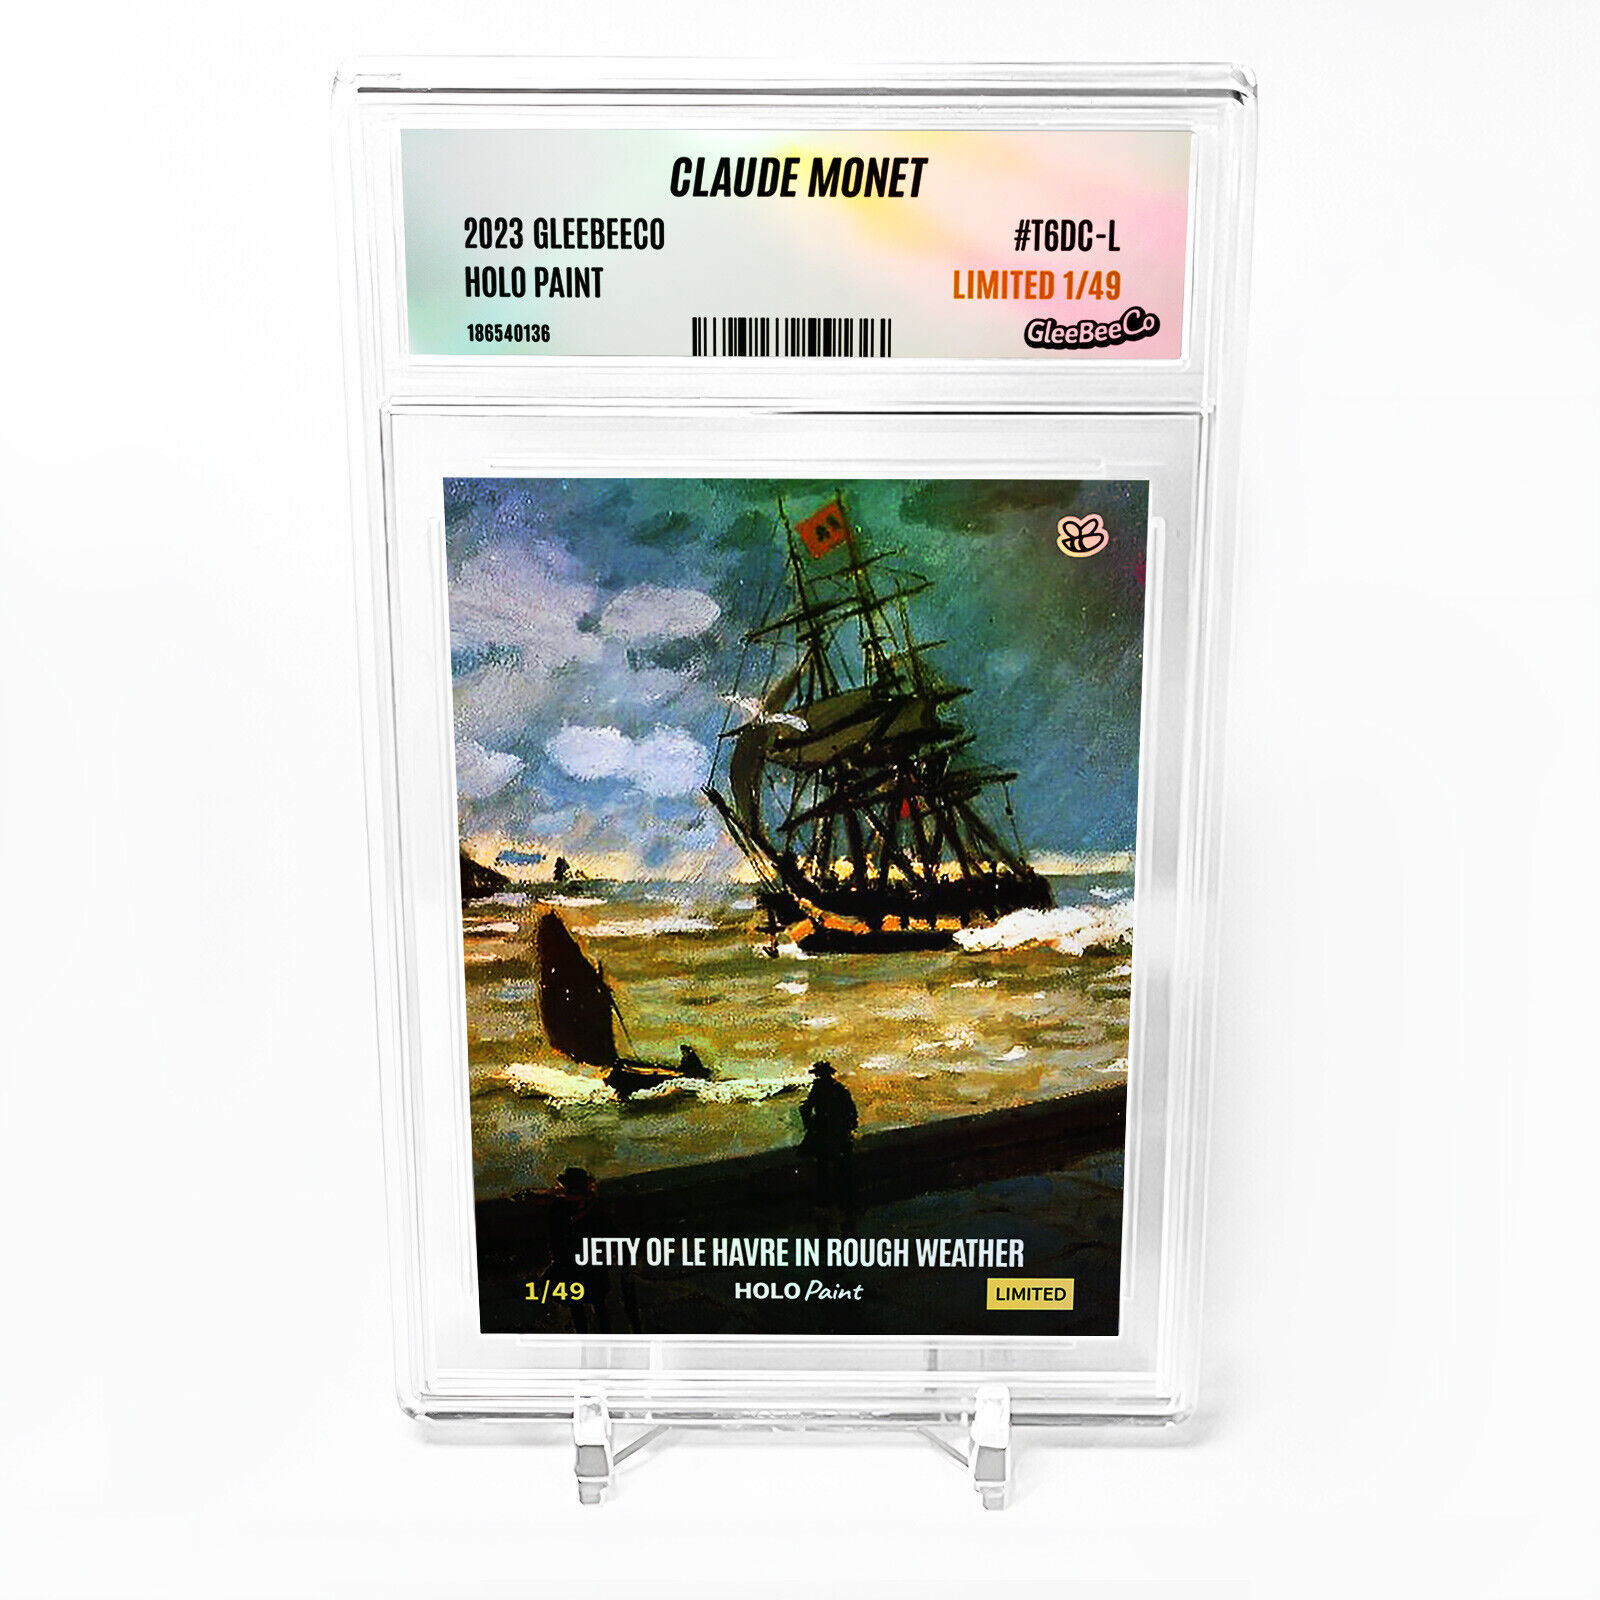 THE JETTY OF LE HAVRE IN ROUGH WEATHER Card GBC #T6DC-L - Limited Edition /49